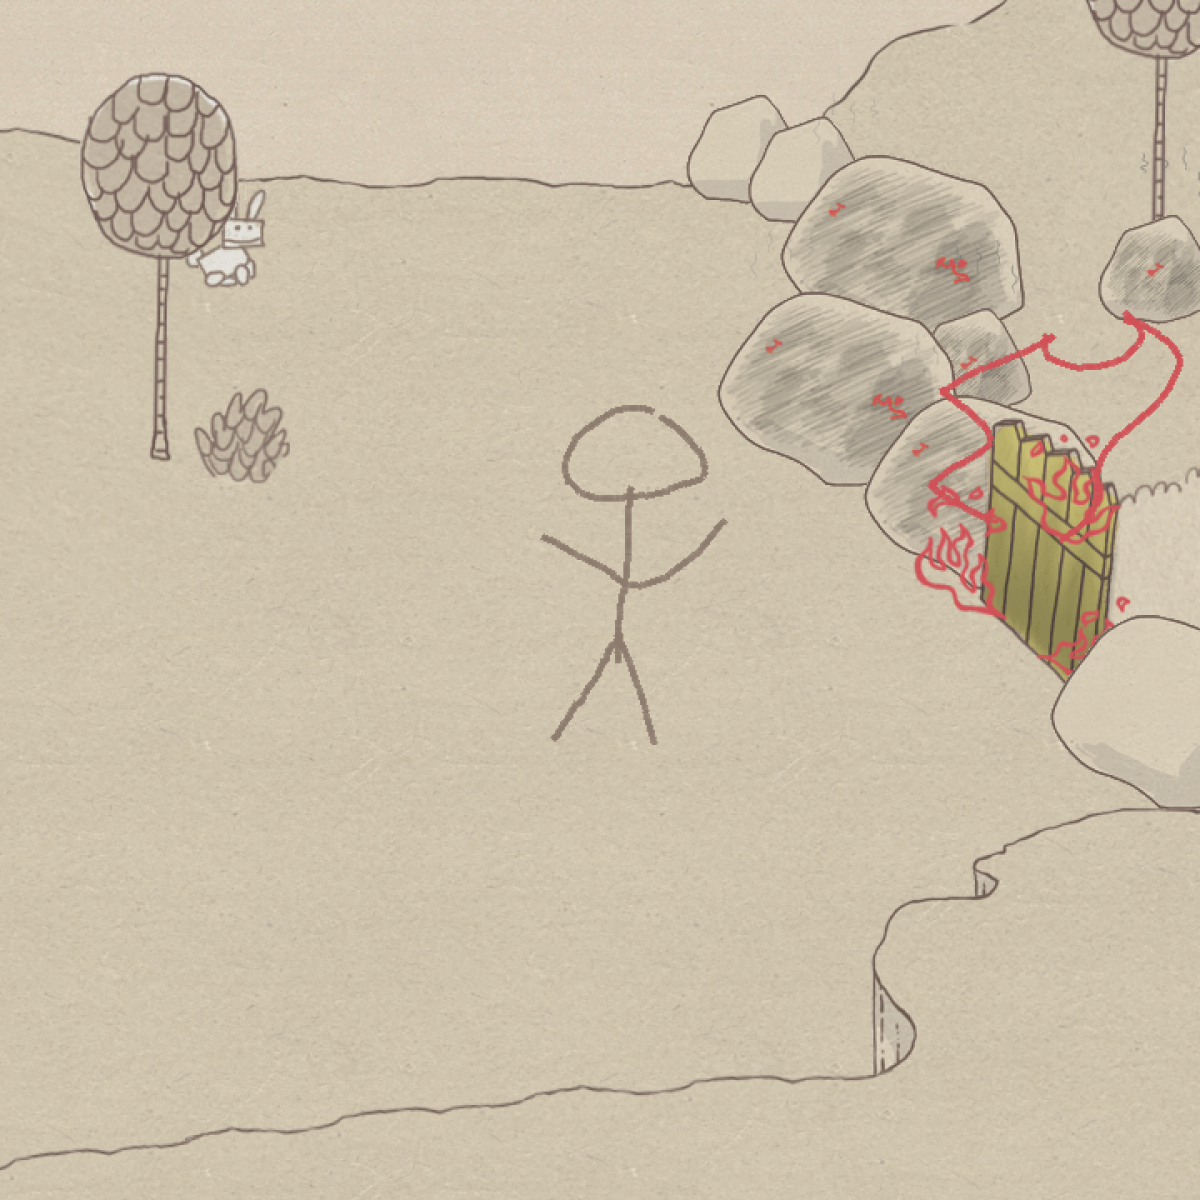 Draw a Stickman: EPIC::Appstore for Android